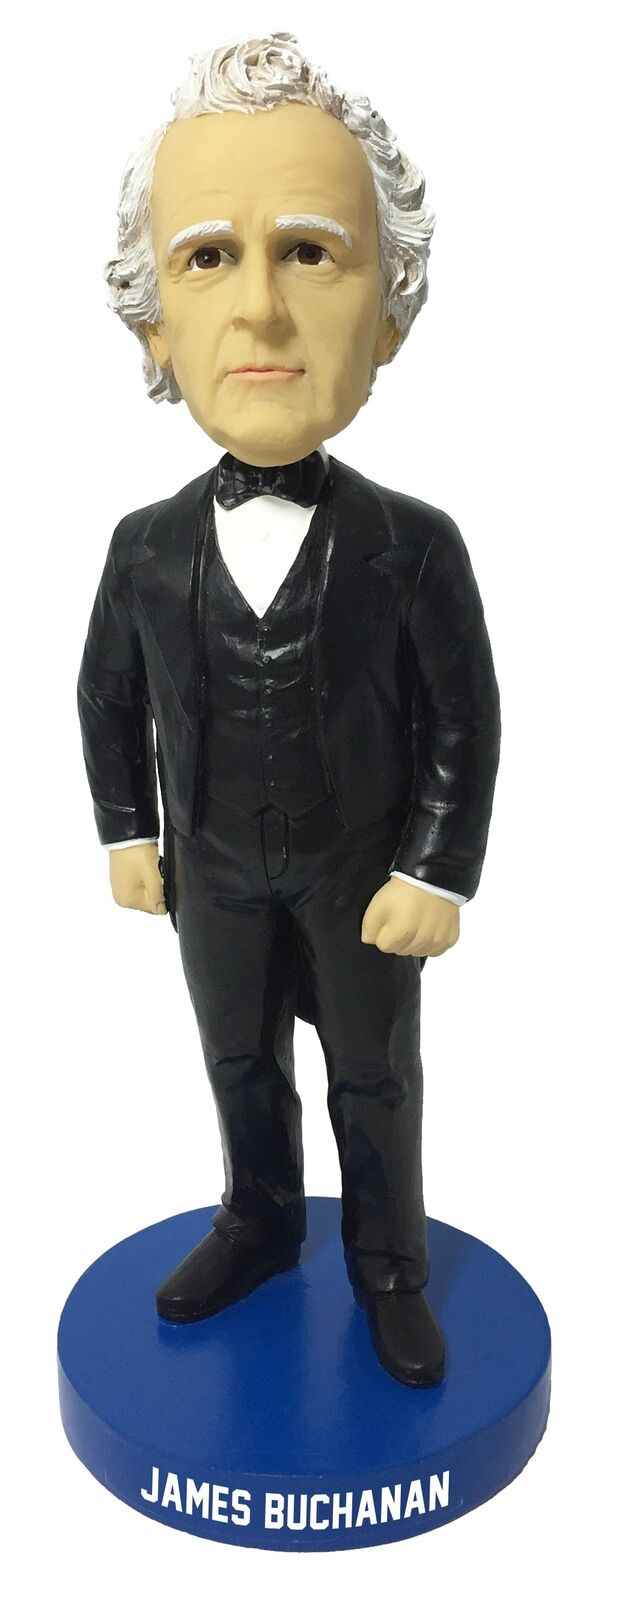 James Buchanan United States President - Numbered to 500 Bobblehead